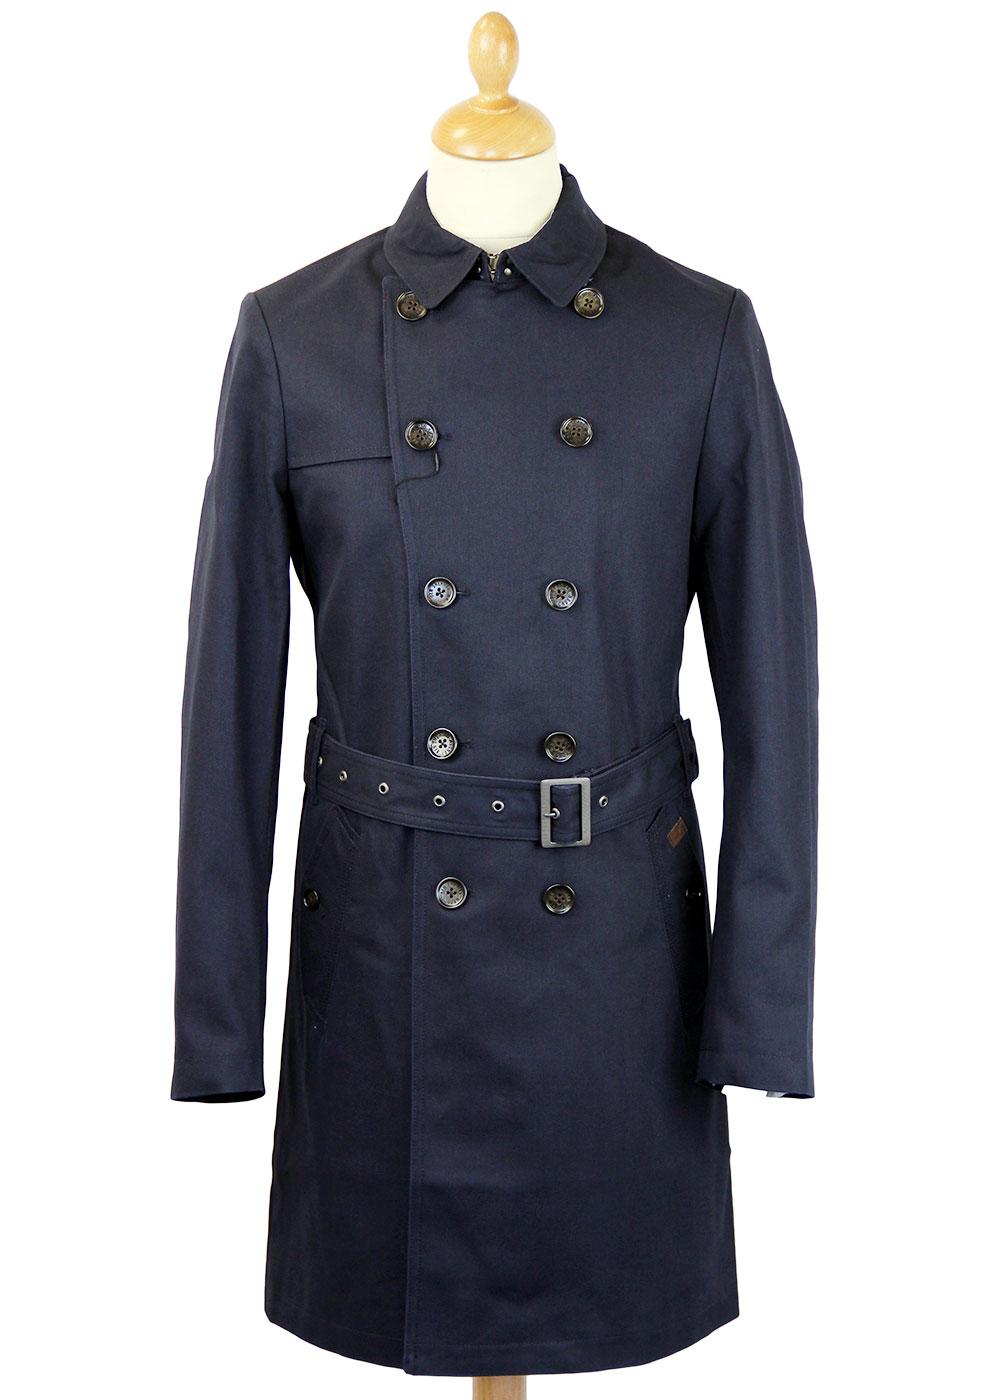 Ben Sherman Retro Mod Double Breasted Twill Trench Coat Navy